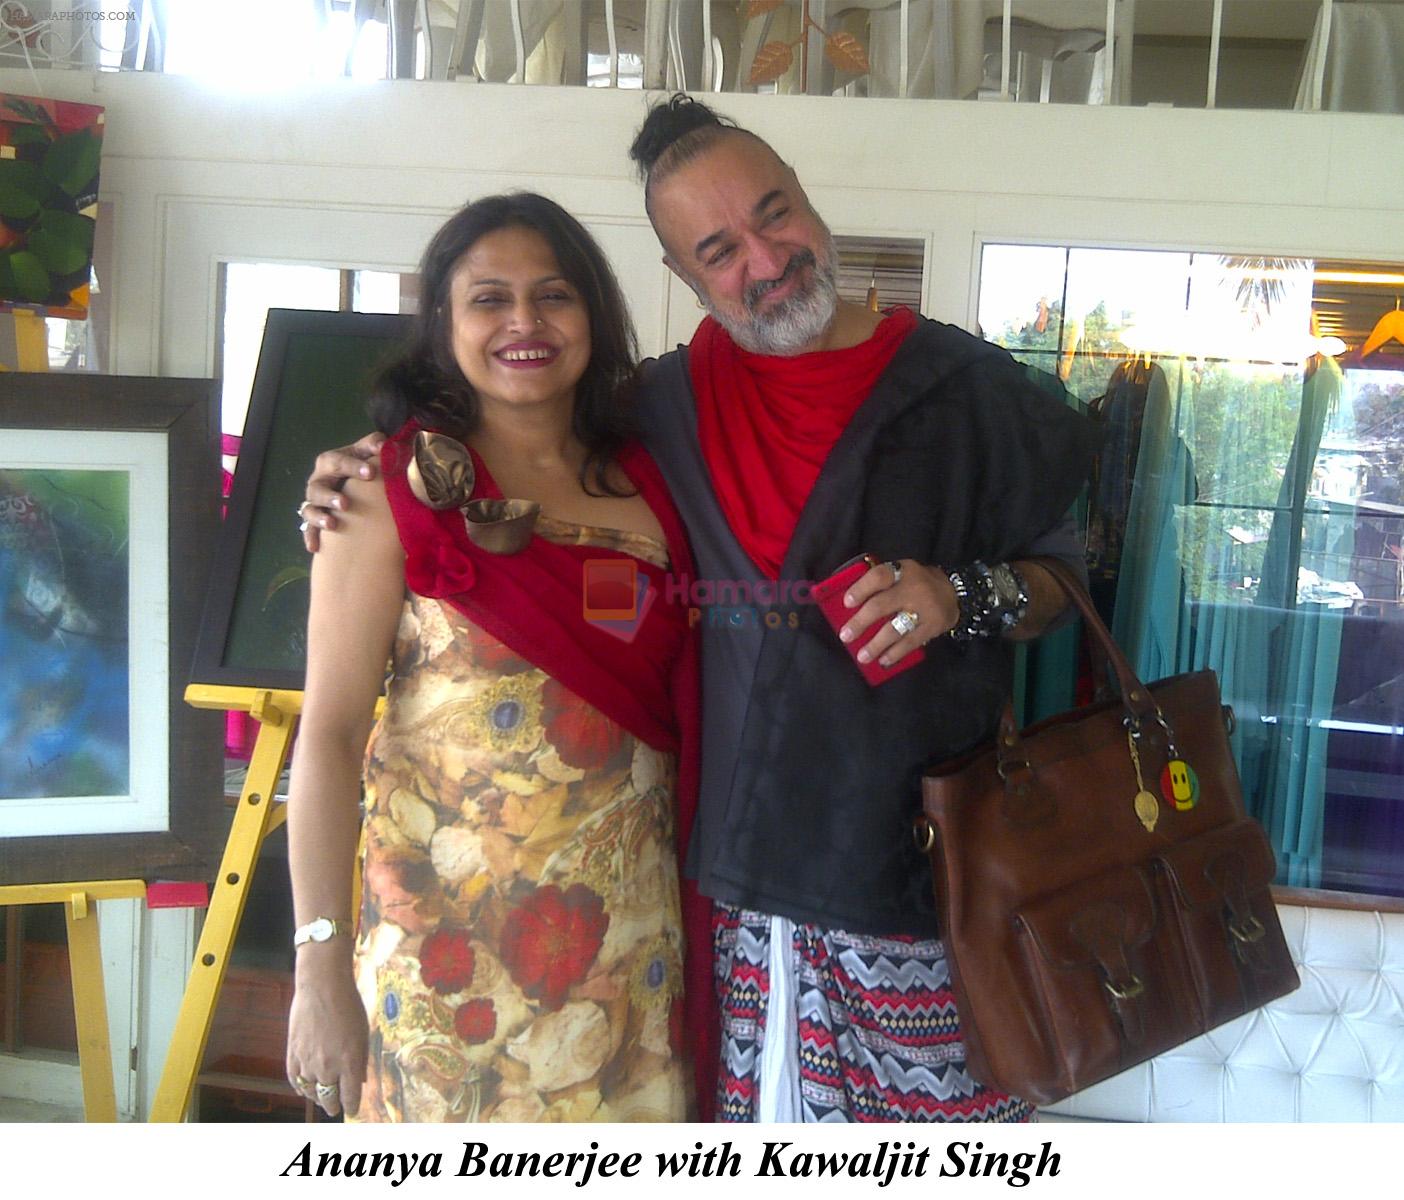 Ananya Banerjee with Kawaljit Singh at the Art and Fashion Brunch in The Wedding Cafe n Lounge on 22nd Jan 2012